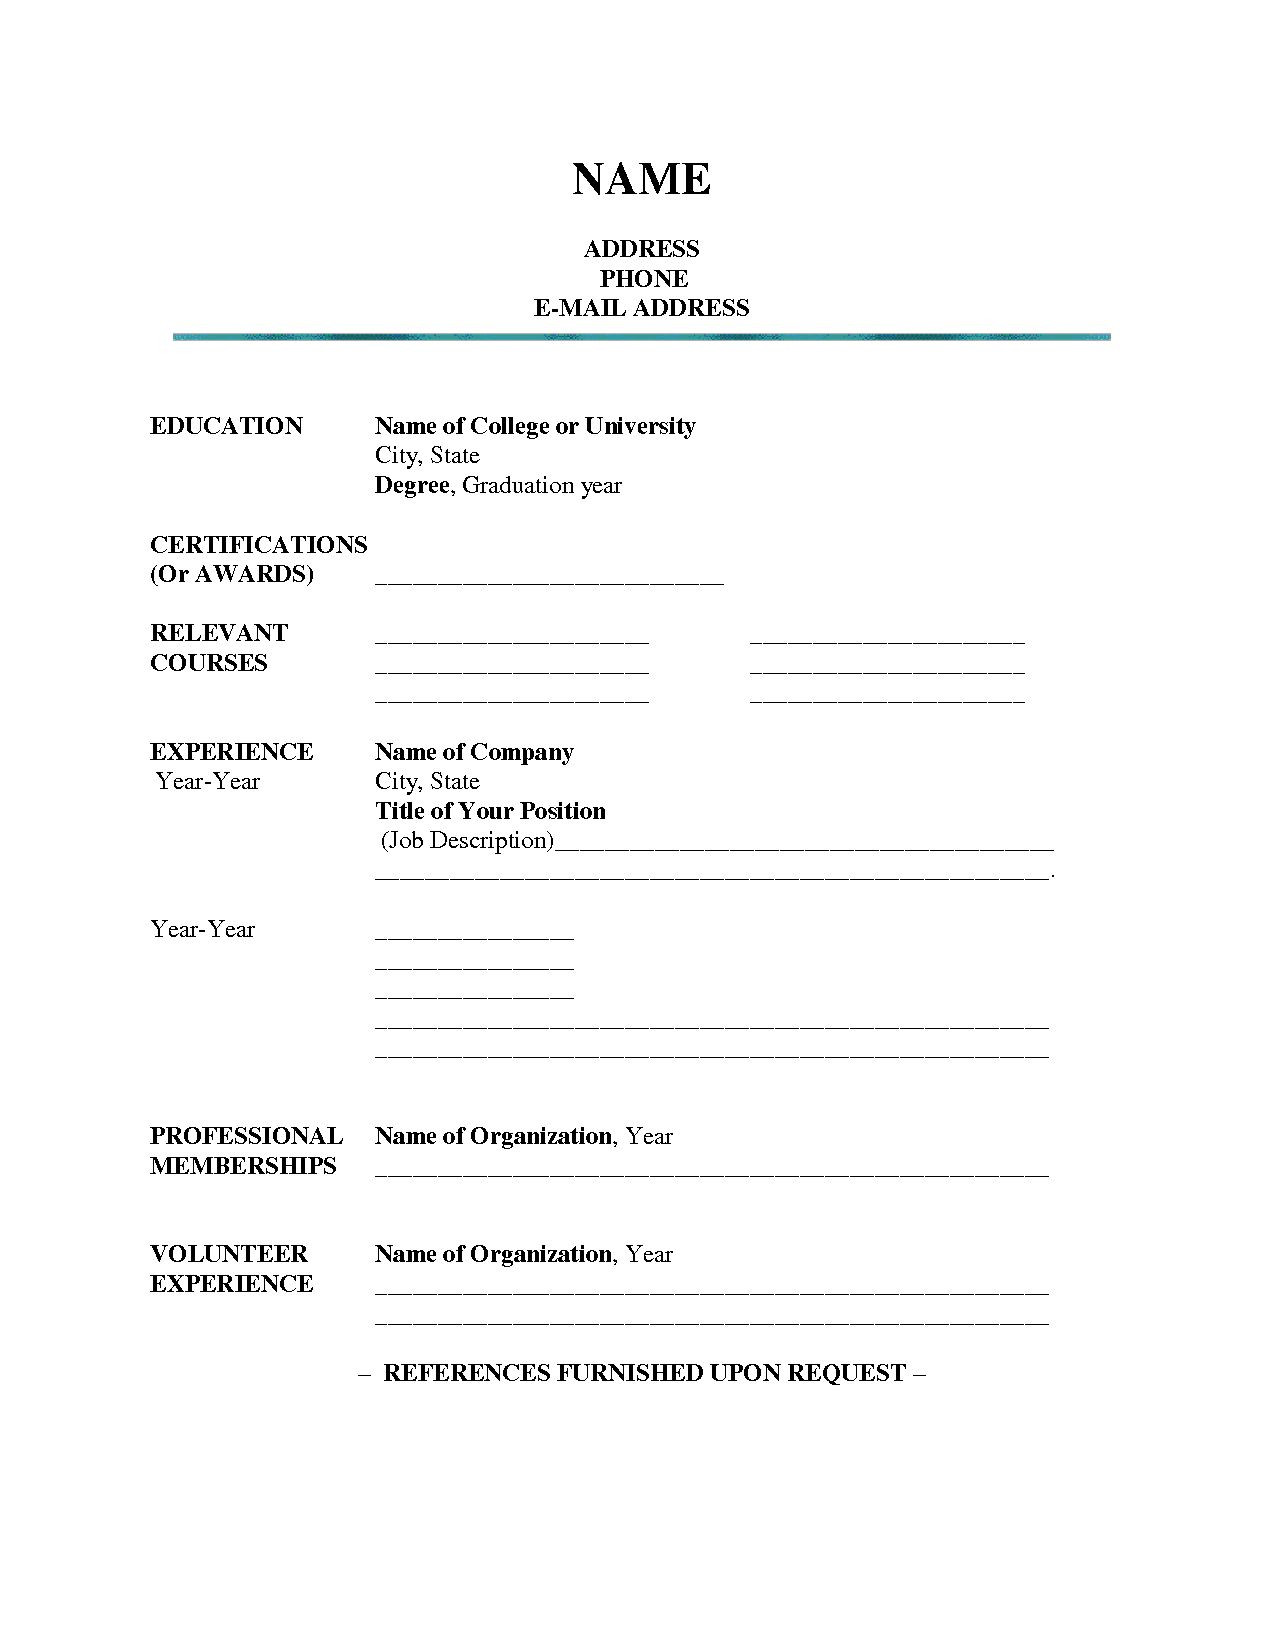 Blank Resume Template for College Students Resume format Blank Student Resume Template, Job Resume Template …